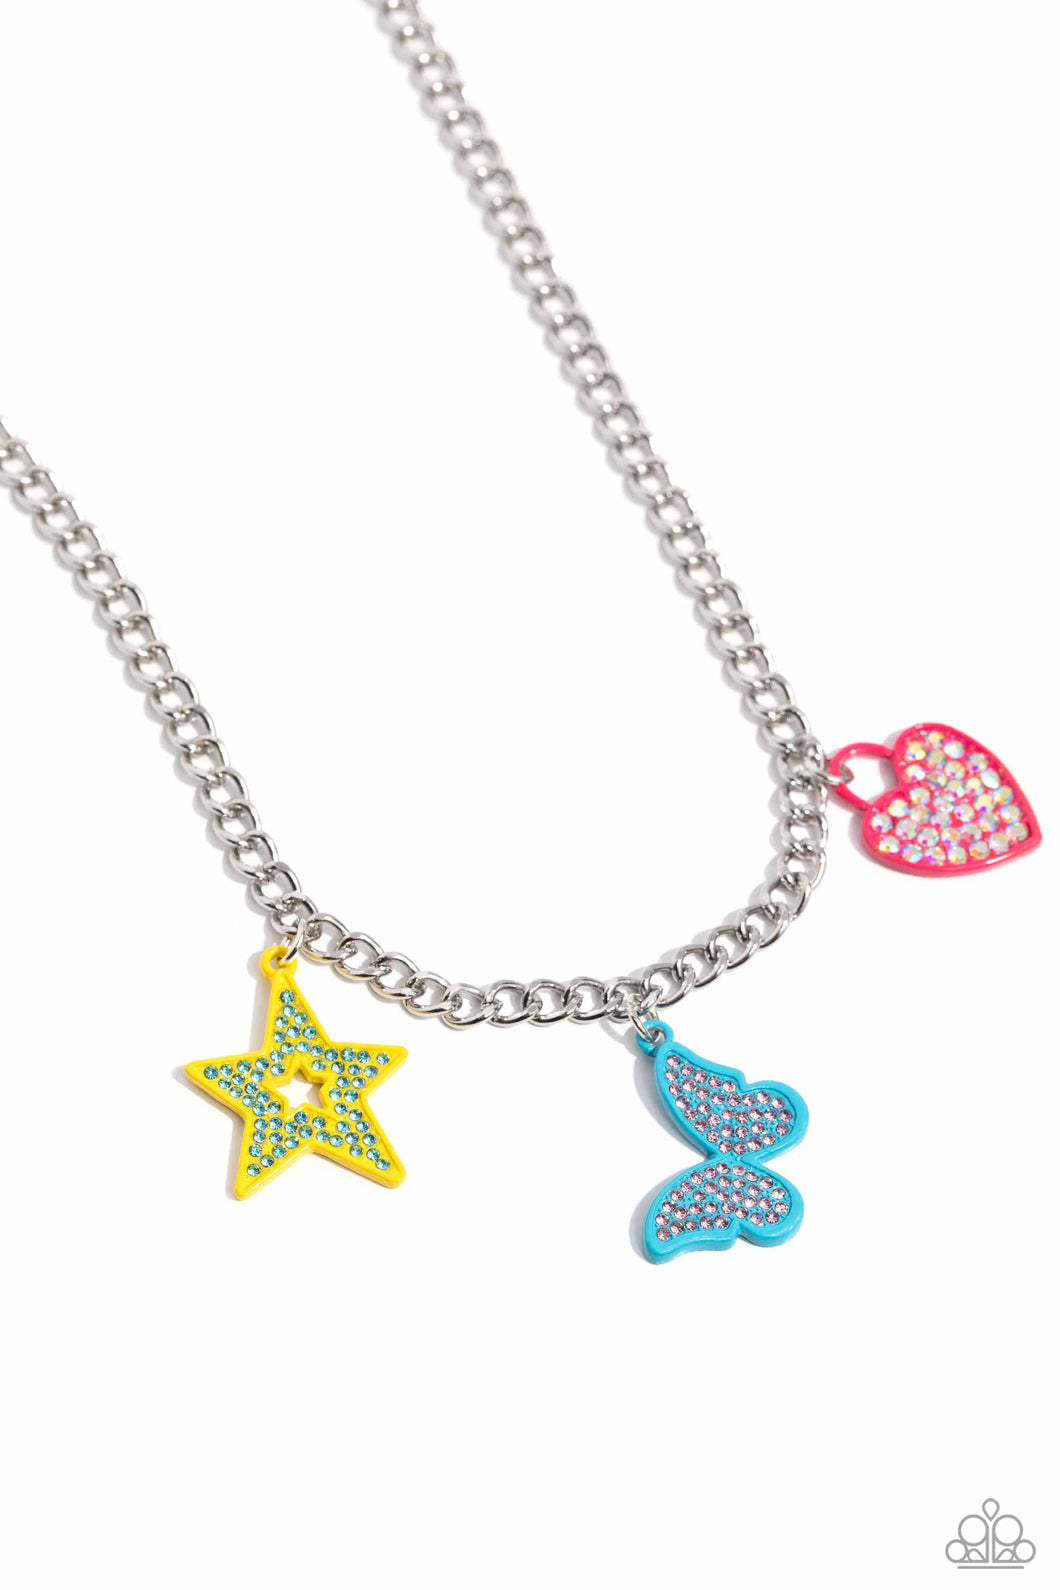 Sensational Shapes - Multi (Painted Star, Butterfly and Heart)Necklace (LOP-0224)